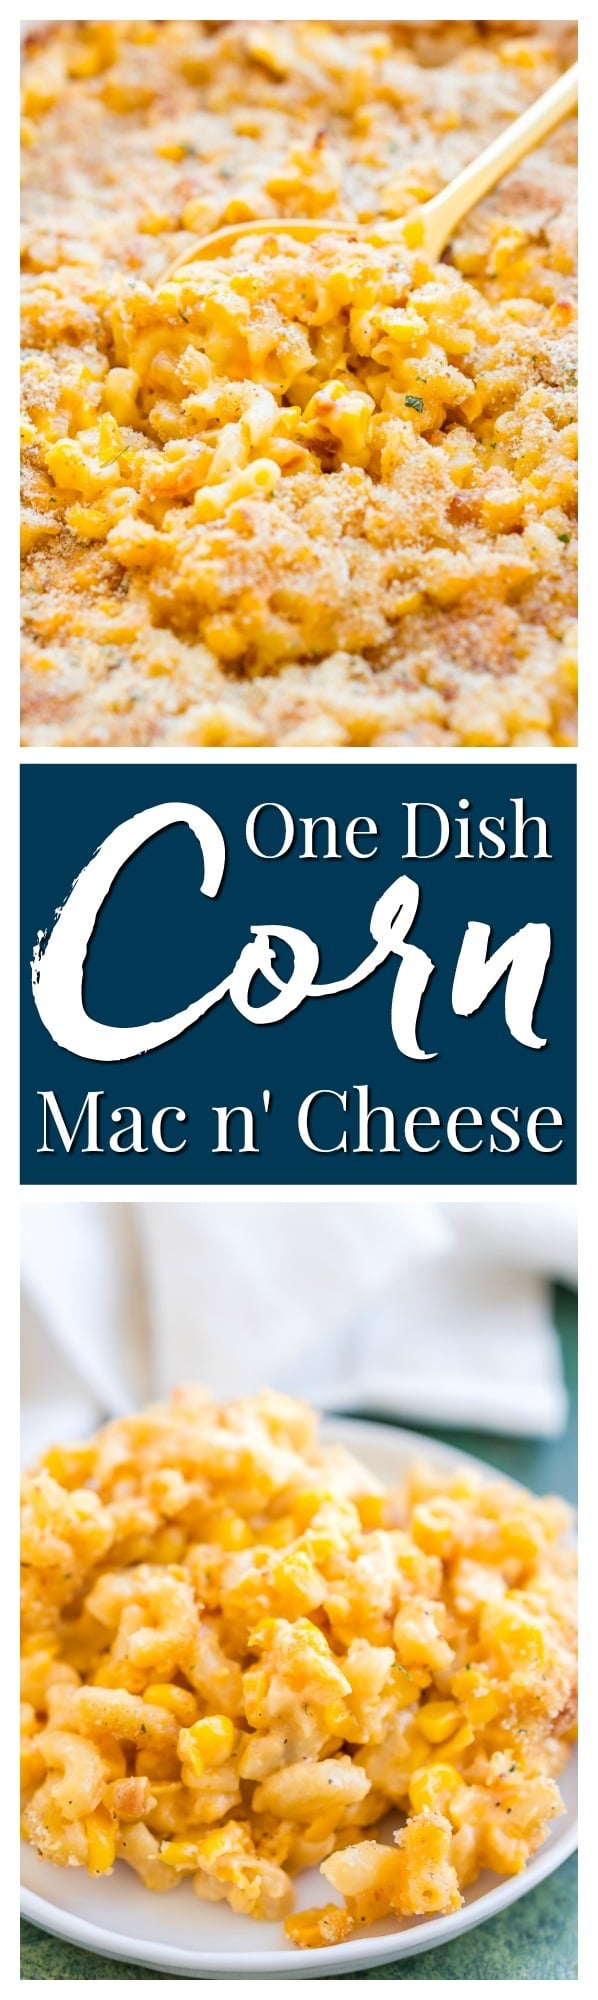 This One Dish Corn Mac n' Cheese has all the comfort you need. Loaded with cheese and sweet corn, it's a pasta dish that's perfect for potlucks and game days. via @sugarandsoulco